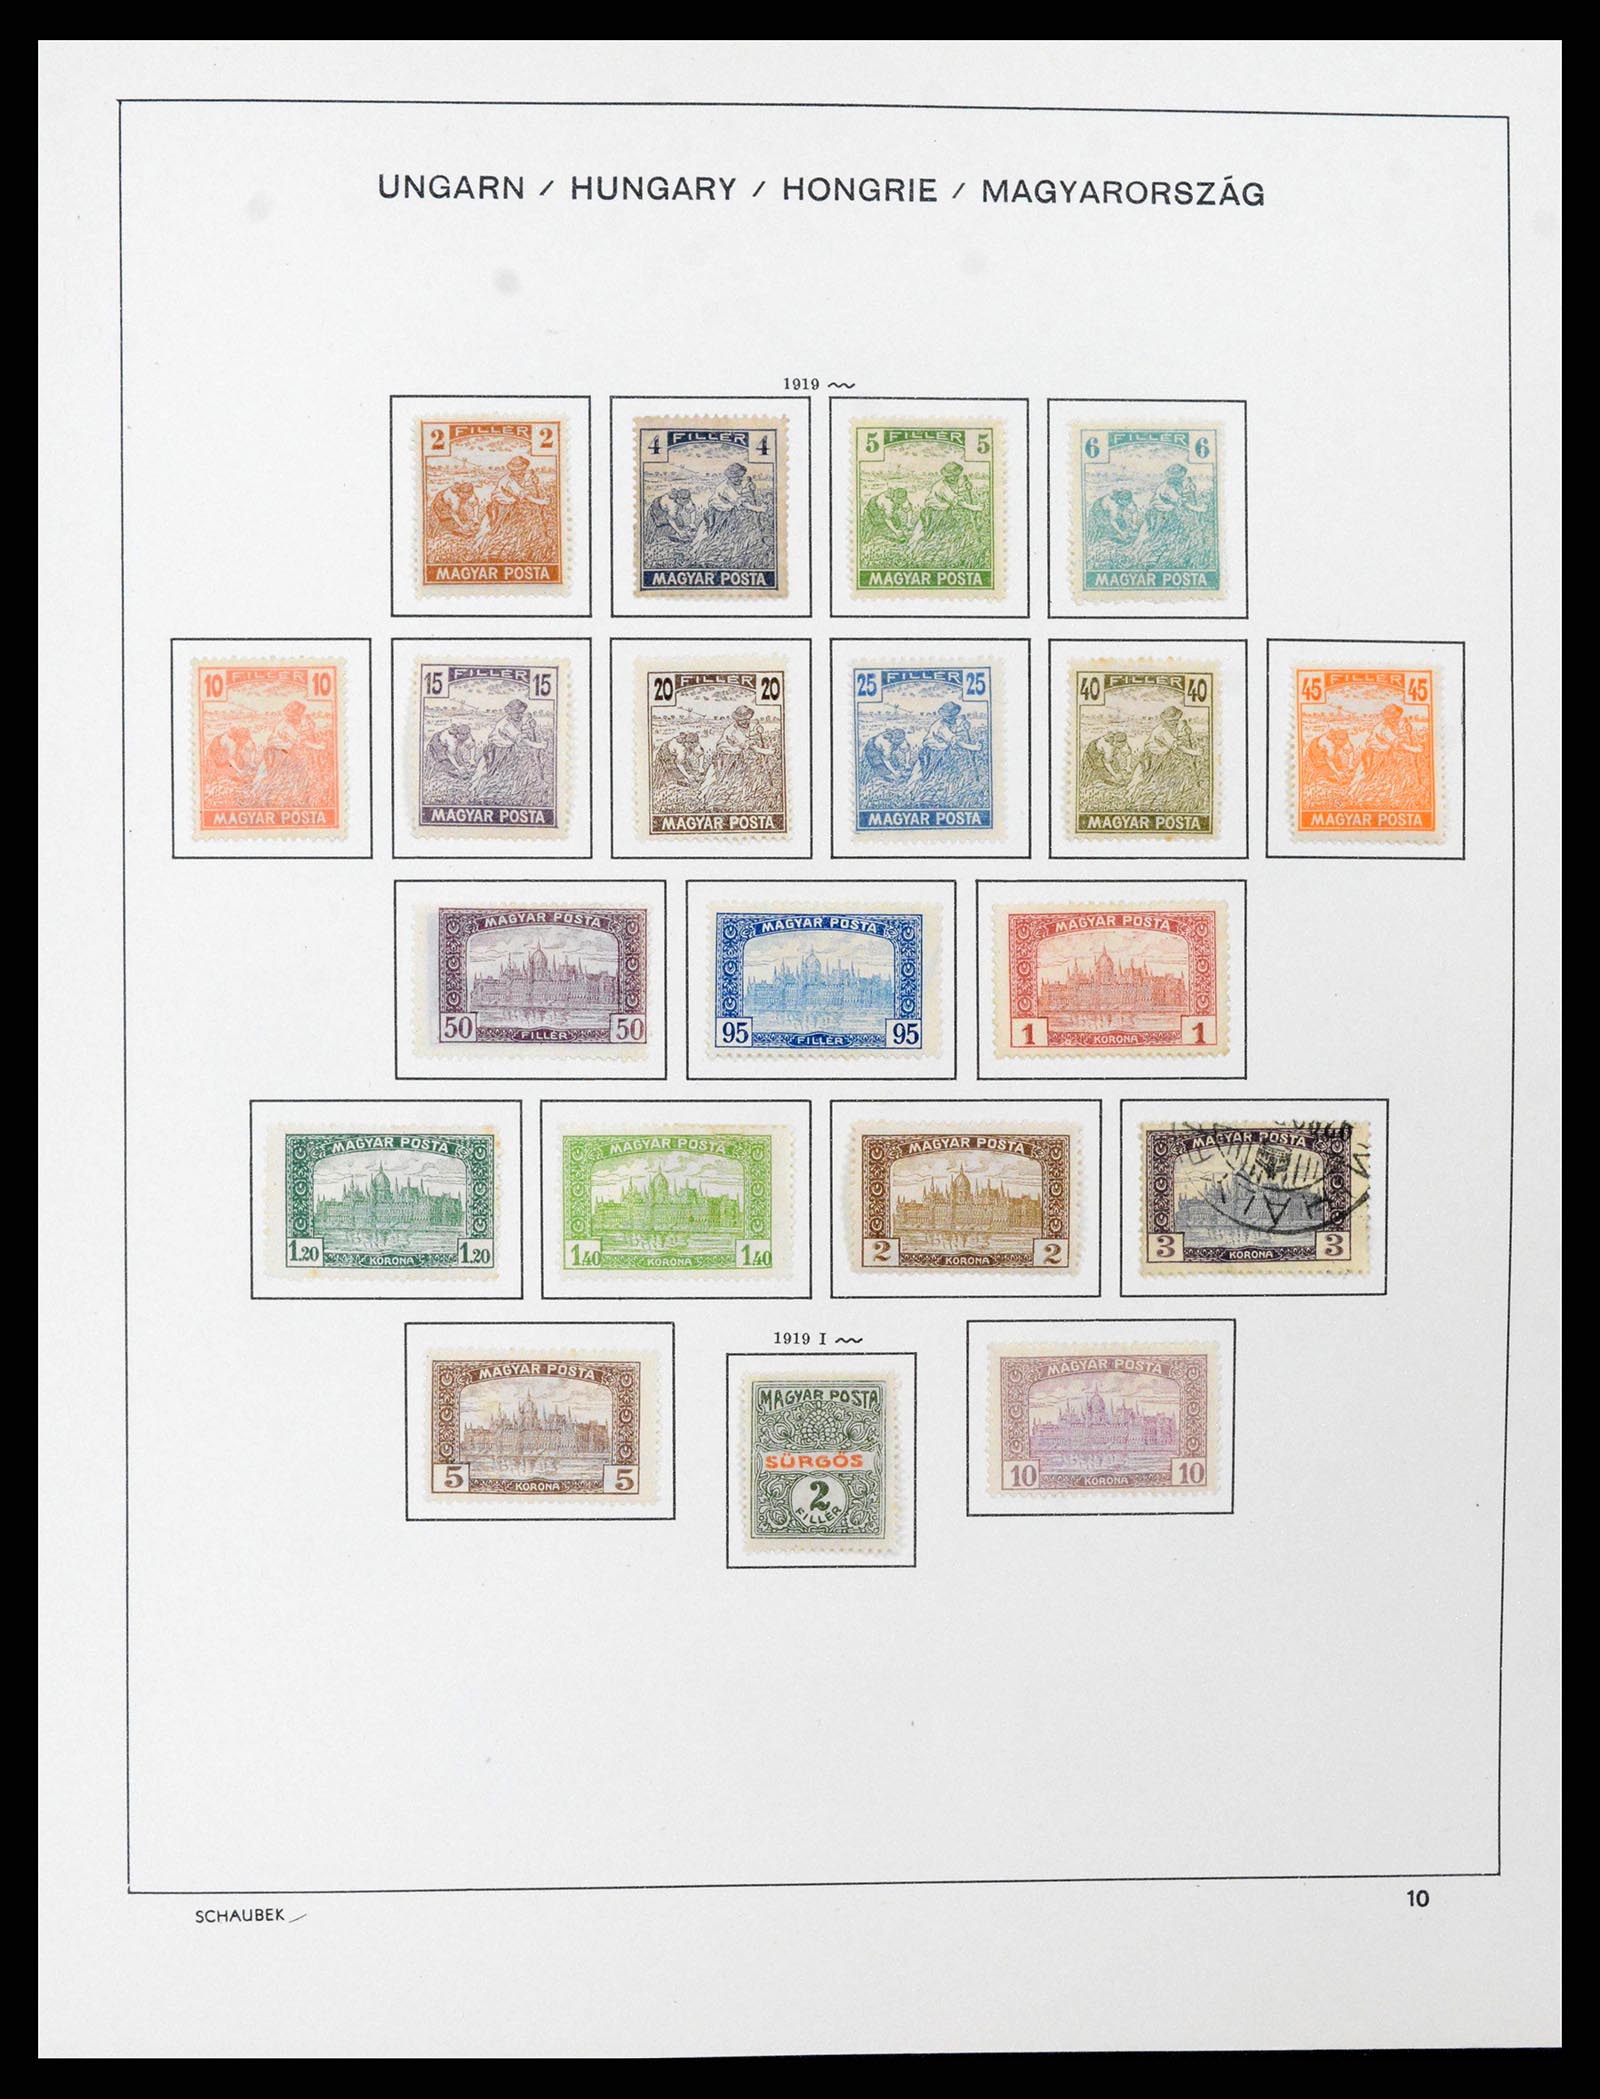 38086 0019 - Stamp collection 38086 Hungary 1871-2000.